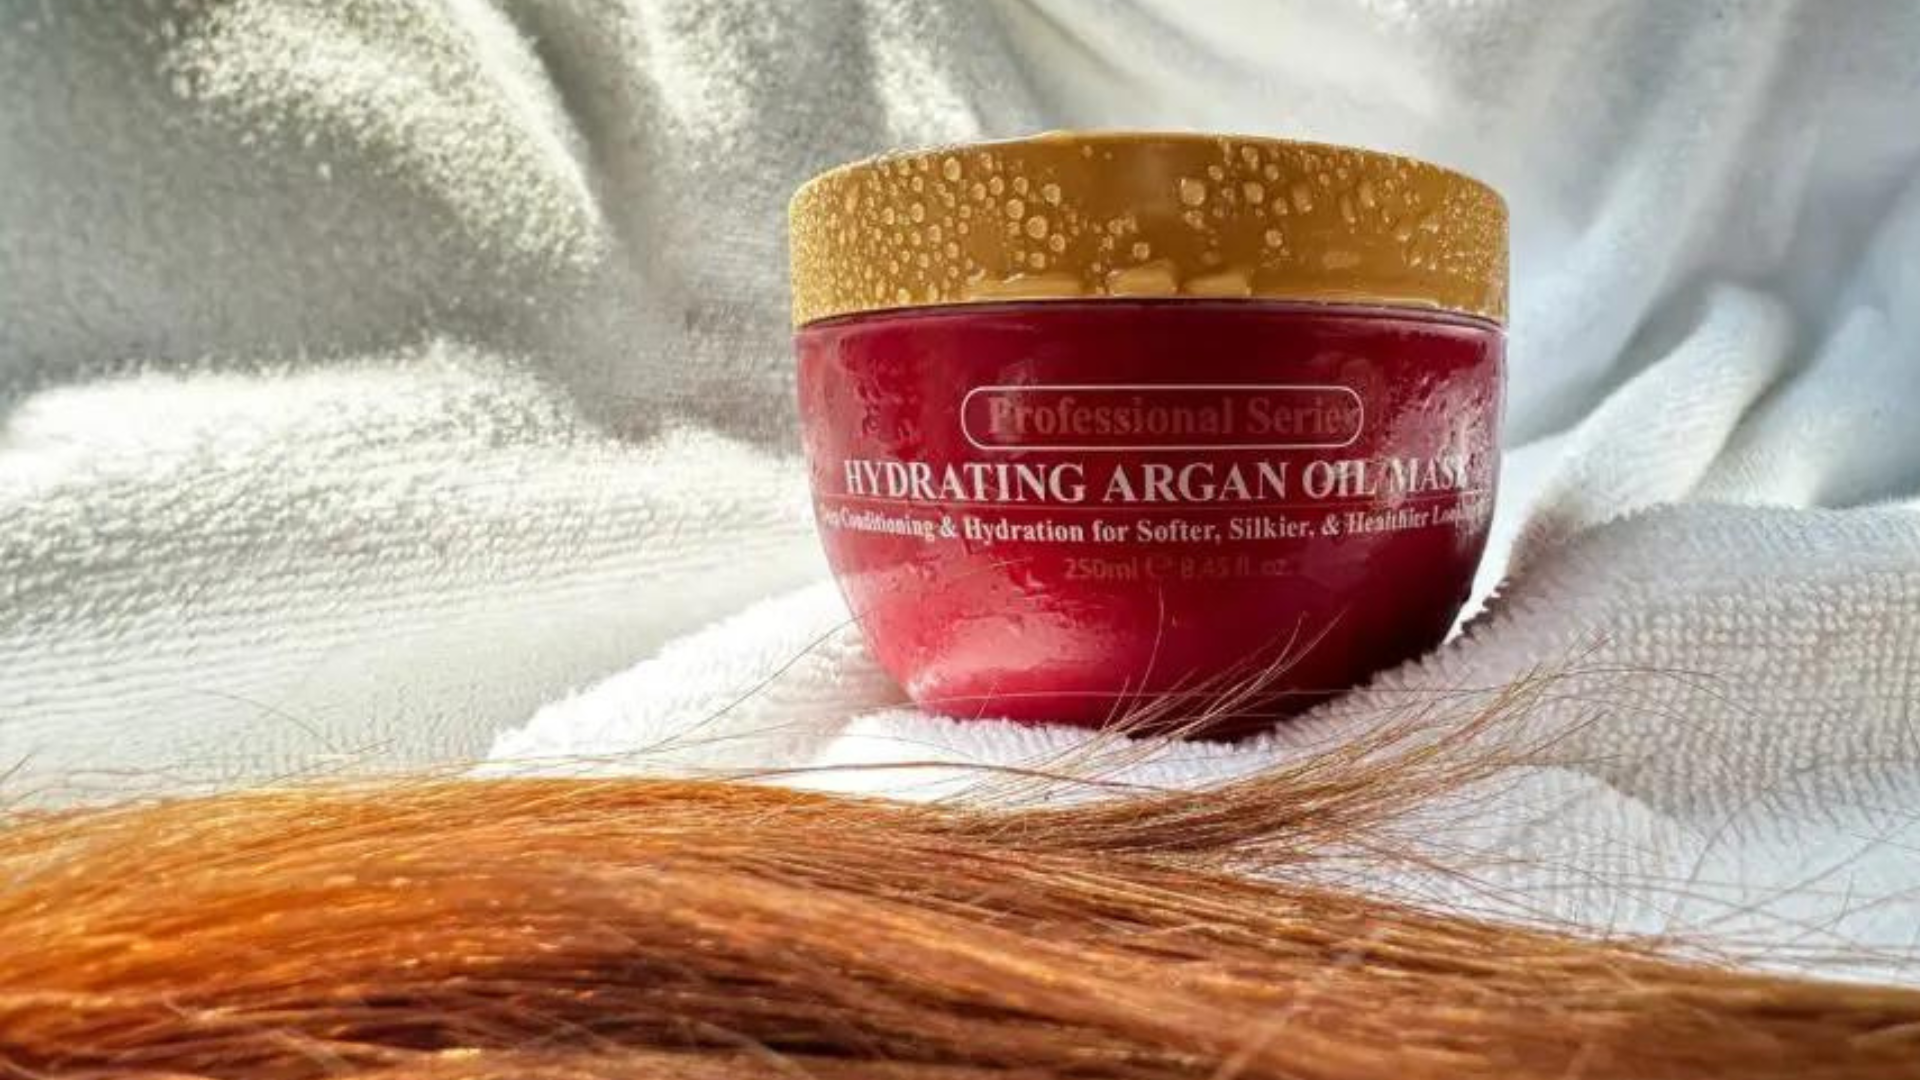 I’m a Redhead Beauty Writer: This is the $13 Hair Product I Swear By